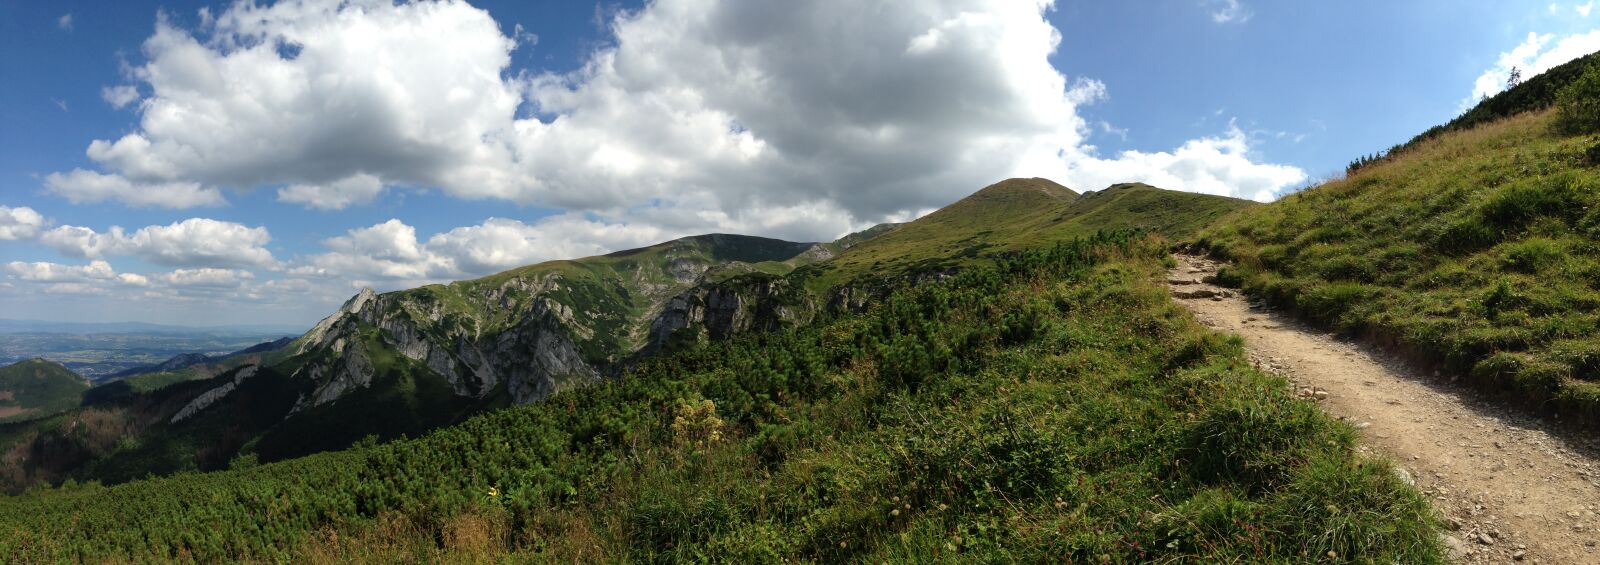 Apple iPhone 5c sample photo. Mountains, tatry, trail photography